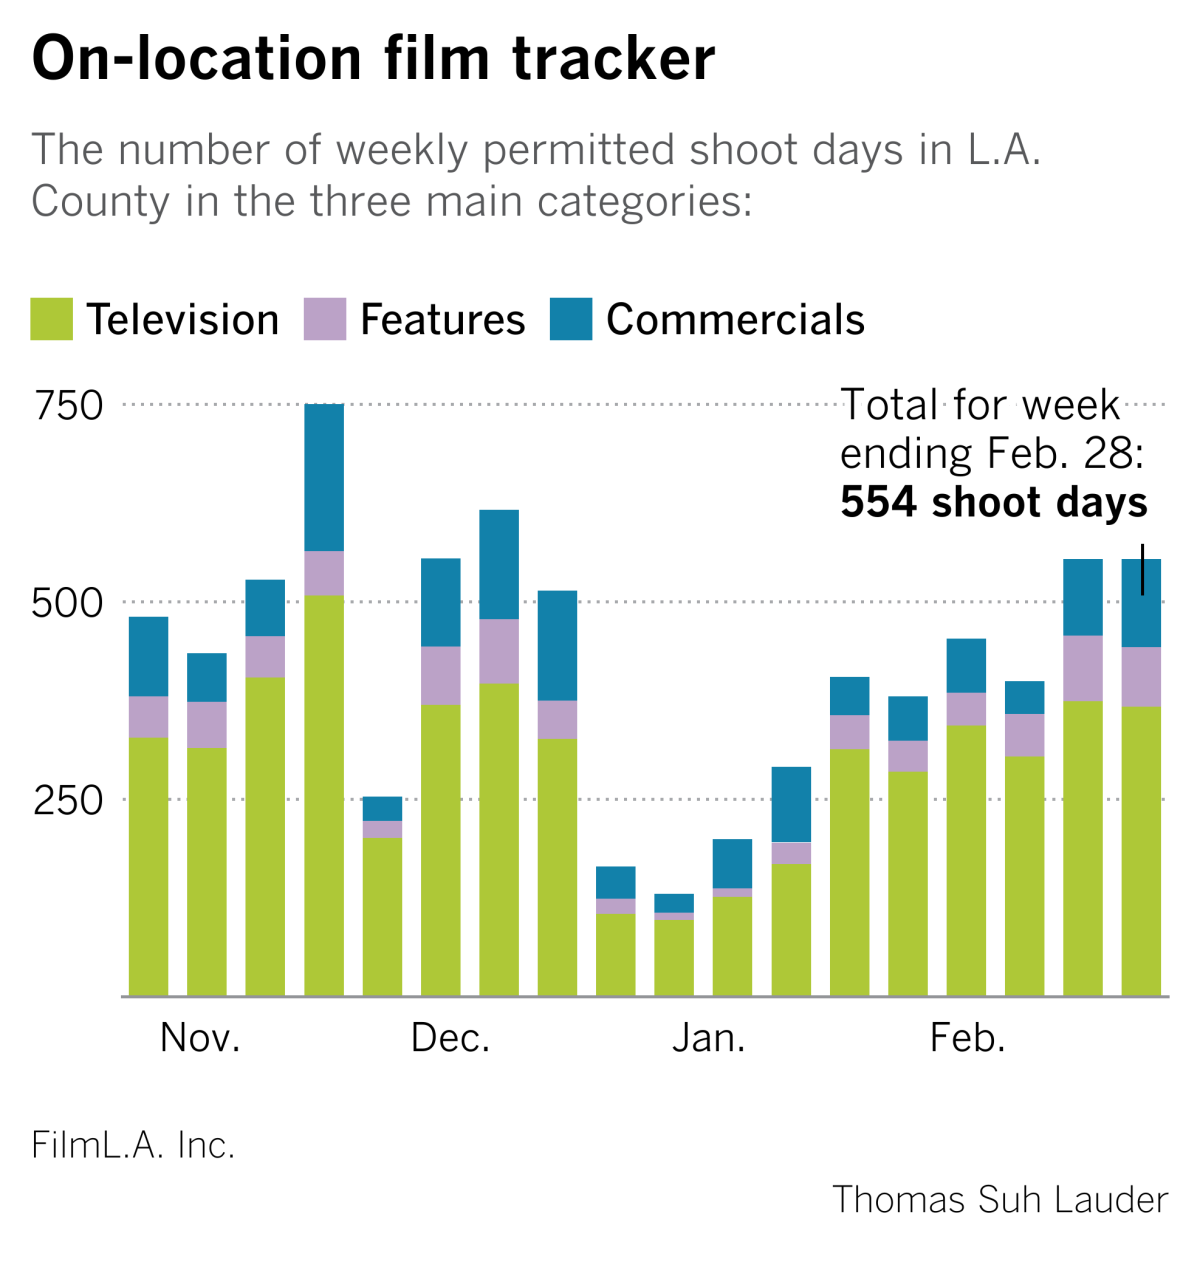 On-location film tracker for the week ended Feb. 28